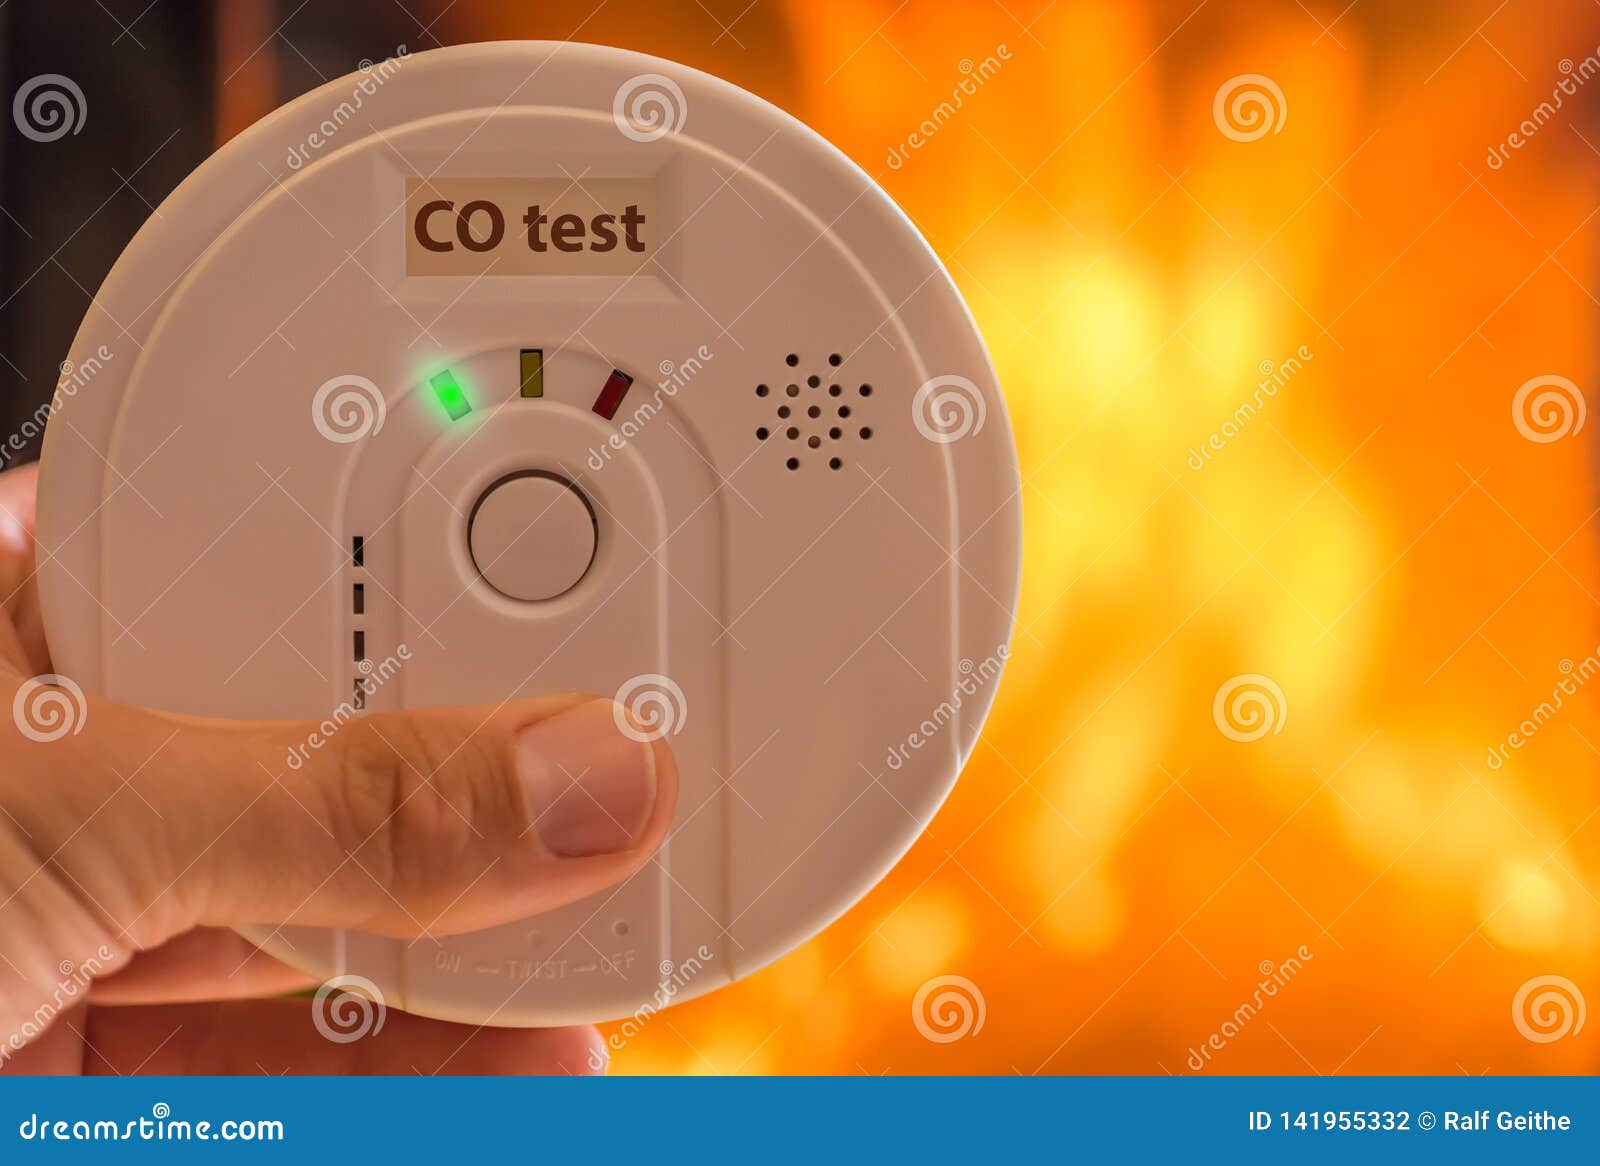 carbon monoxide alarm in the air for rooms heated by stoves and fireplaces